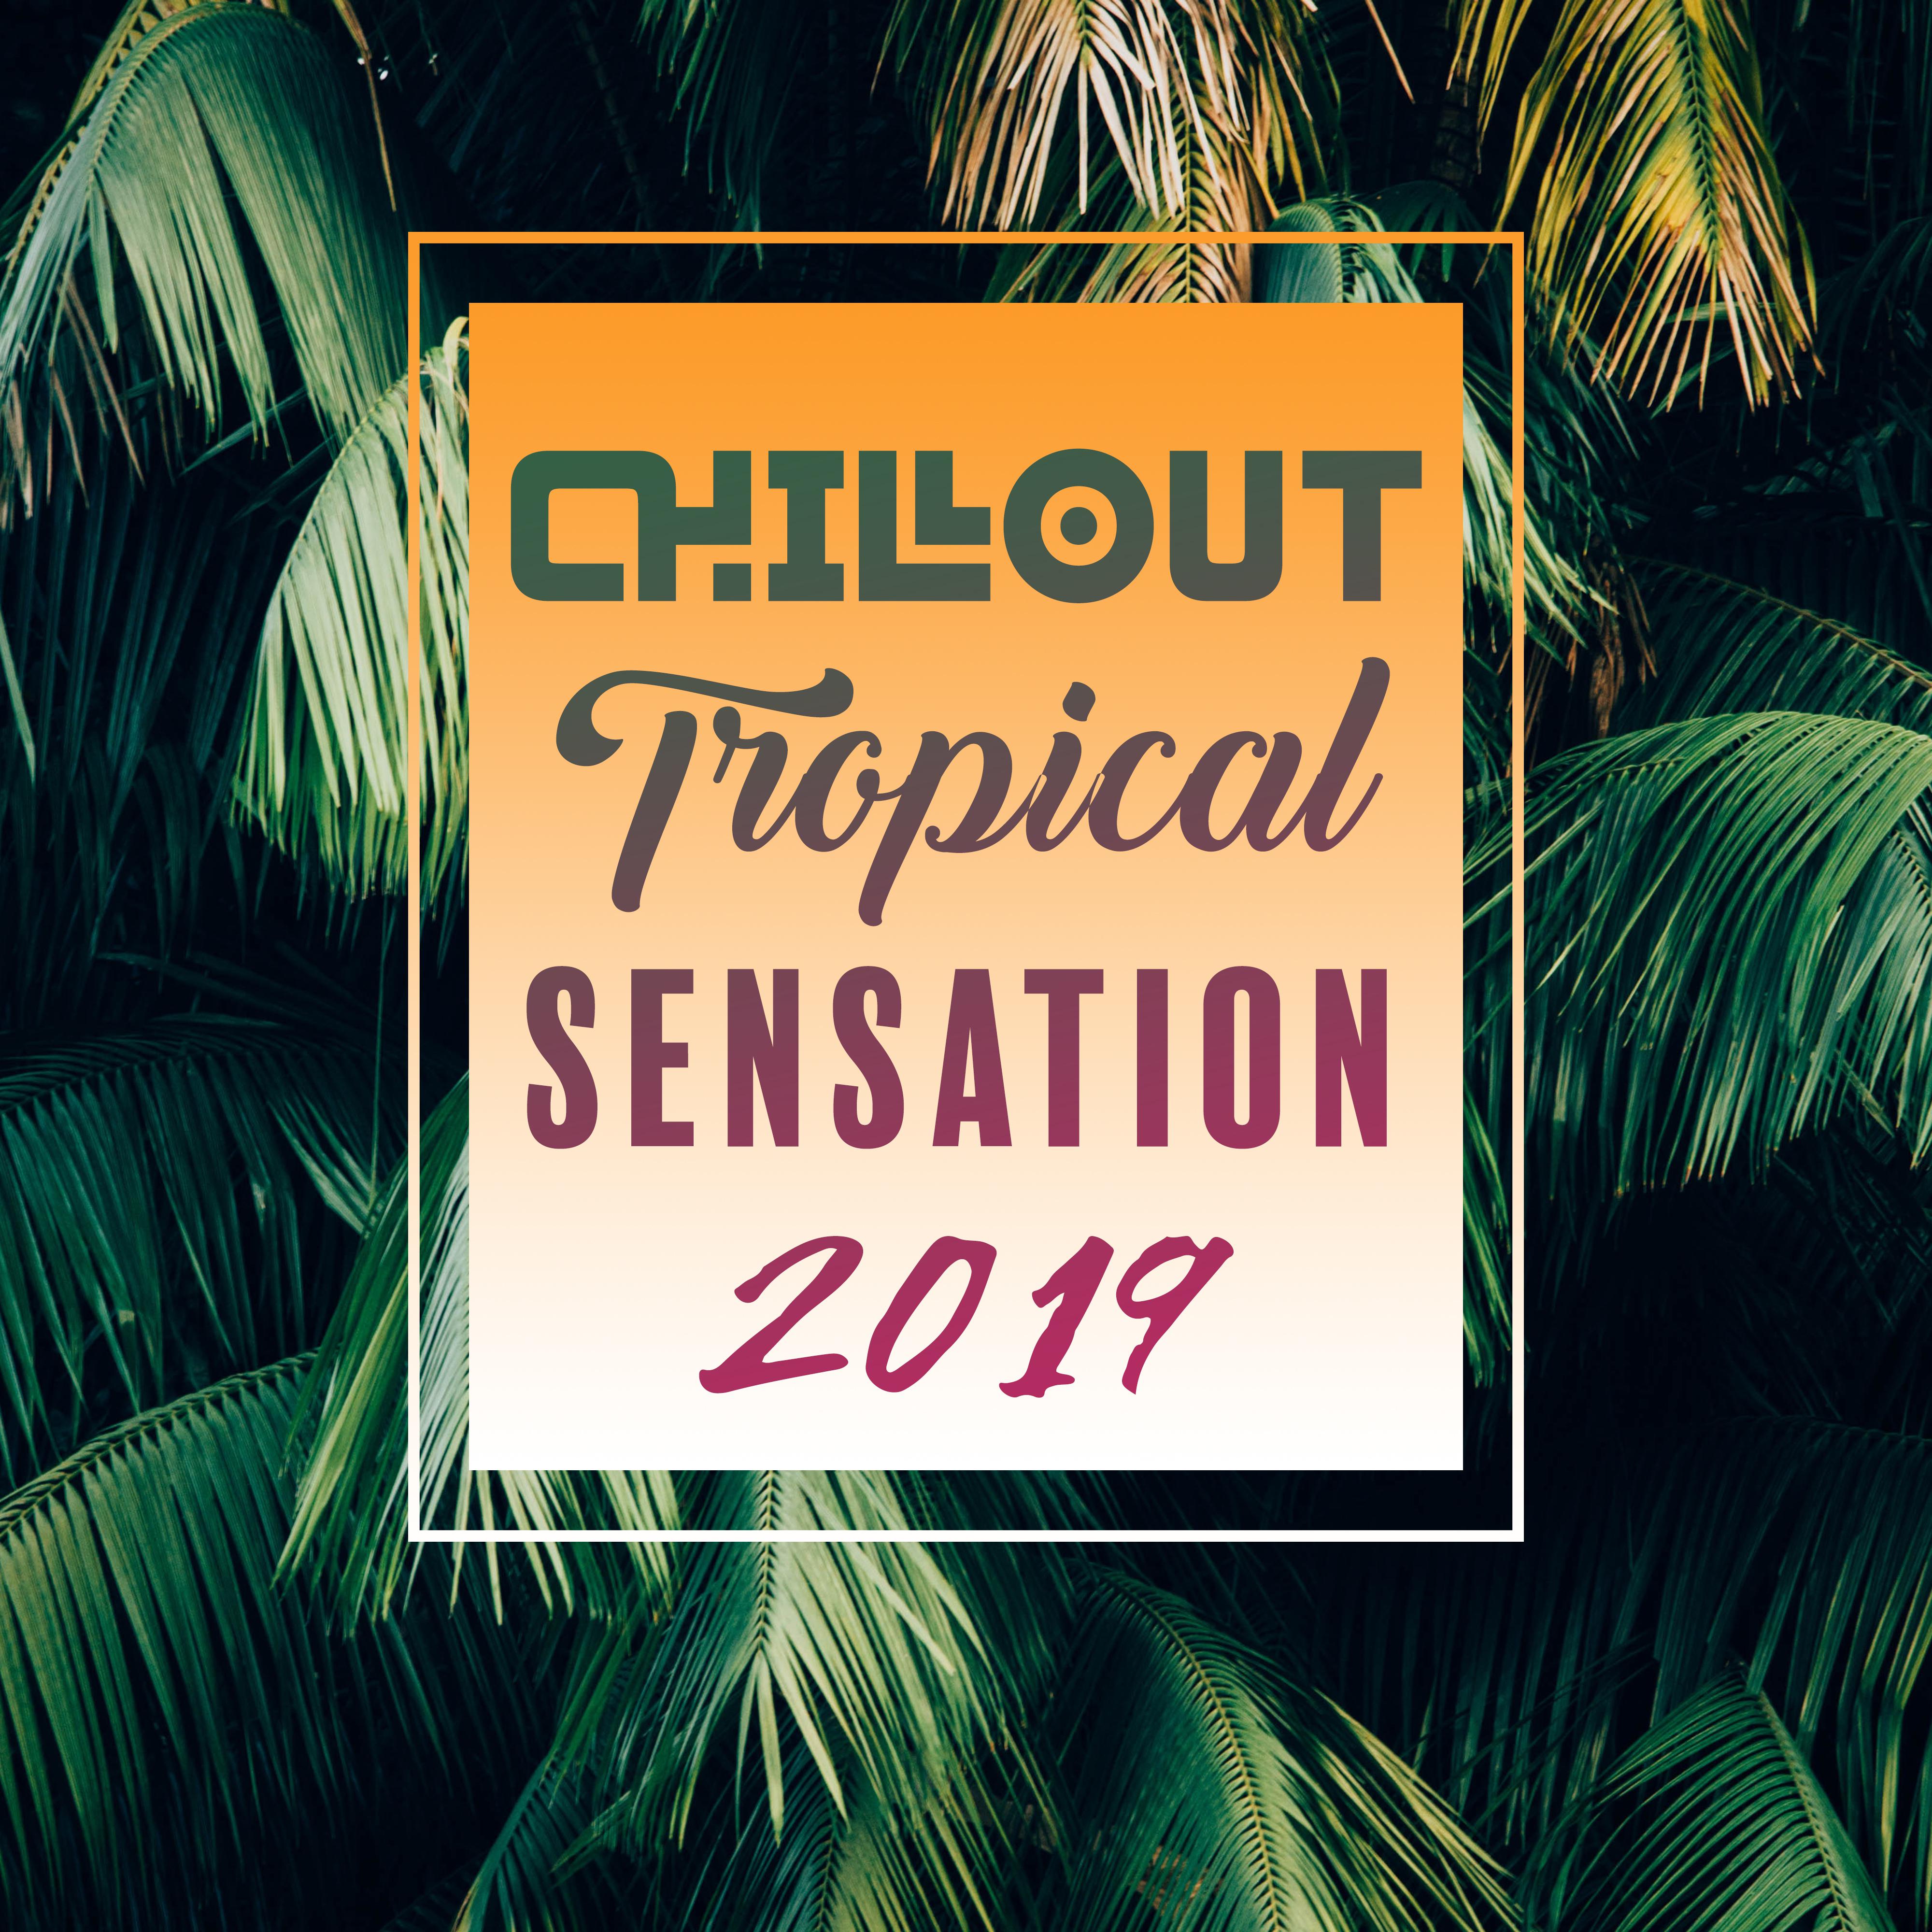 Chillout Tropical Sensation 2019 – Selection of Most Relaxing Top Chill Out Music, Vacation Beats, Beach Time Under The Palms, Positive Vibes, Summer Beach Bar